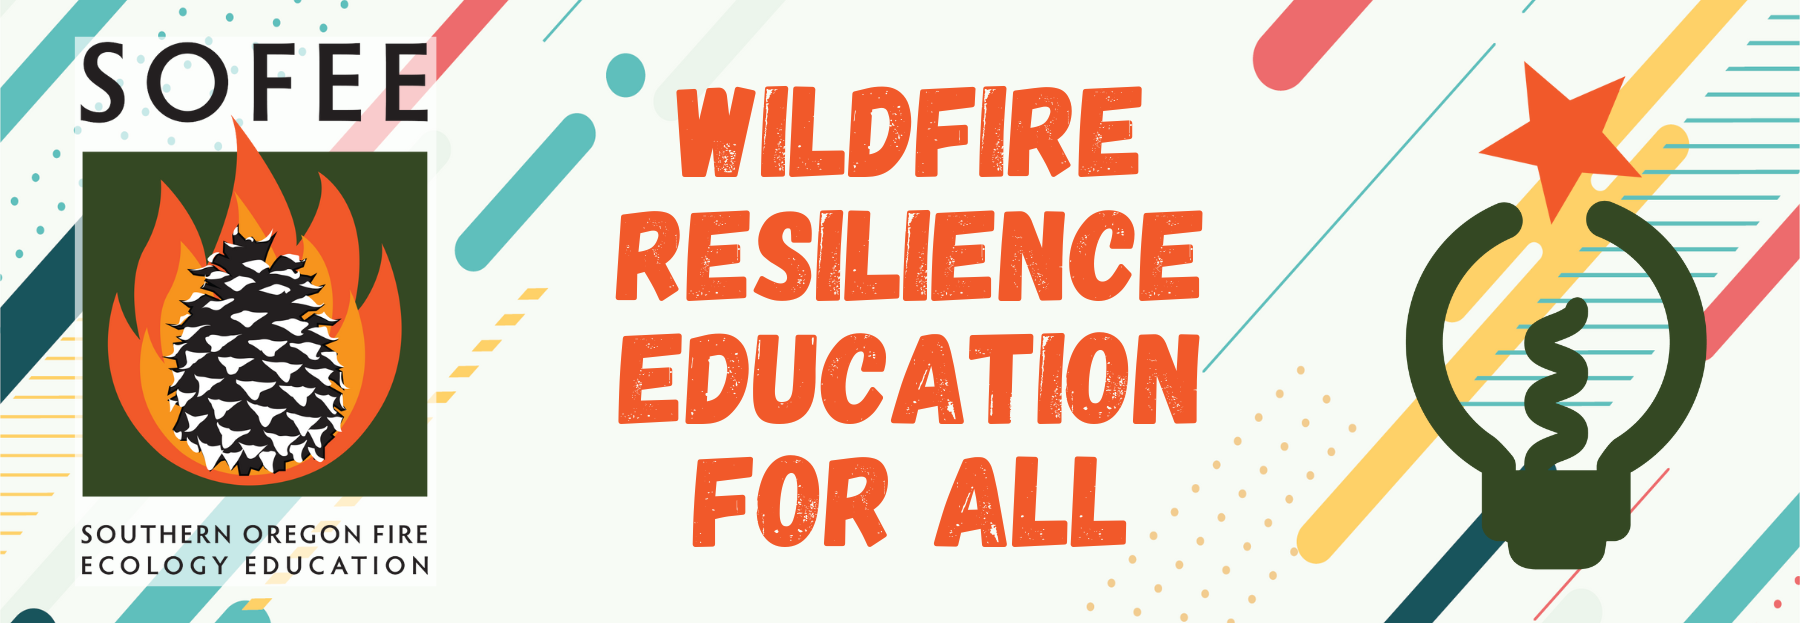 Southern Oregon Fire Ecology Education and ScienceWorks present 